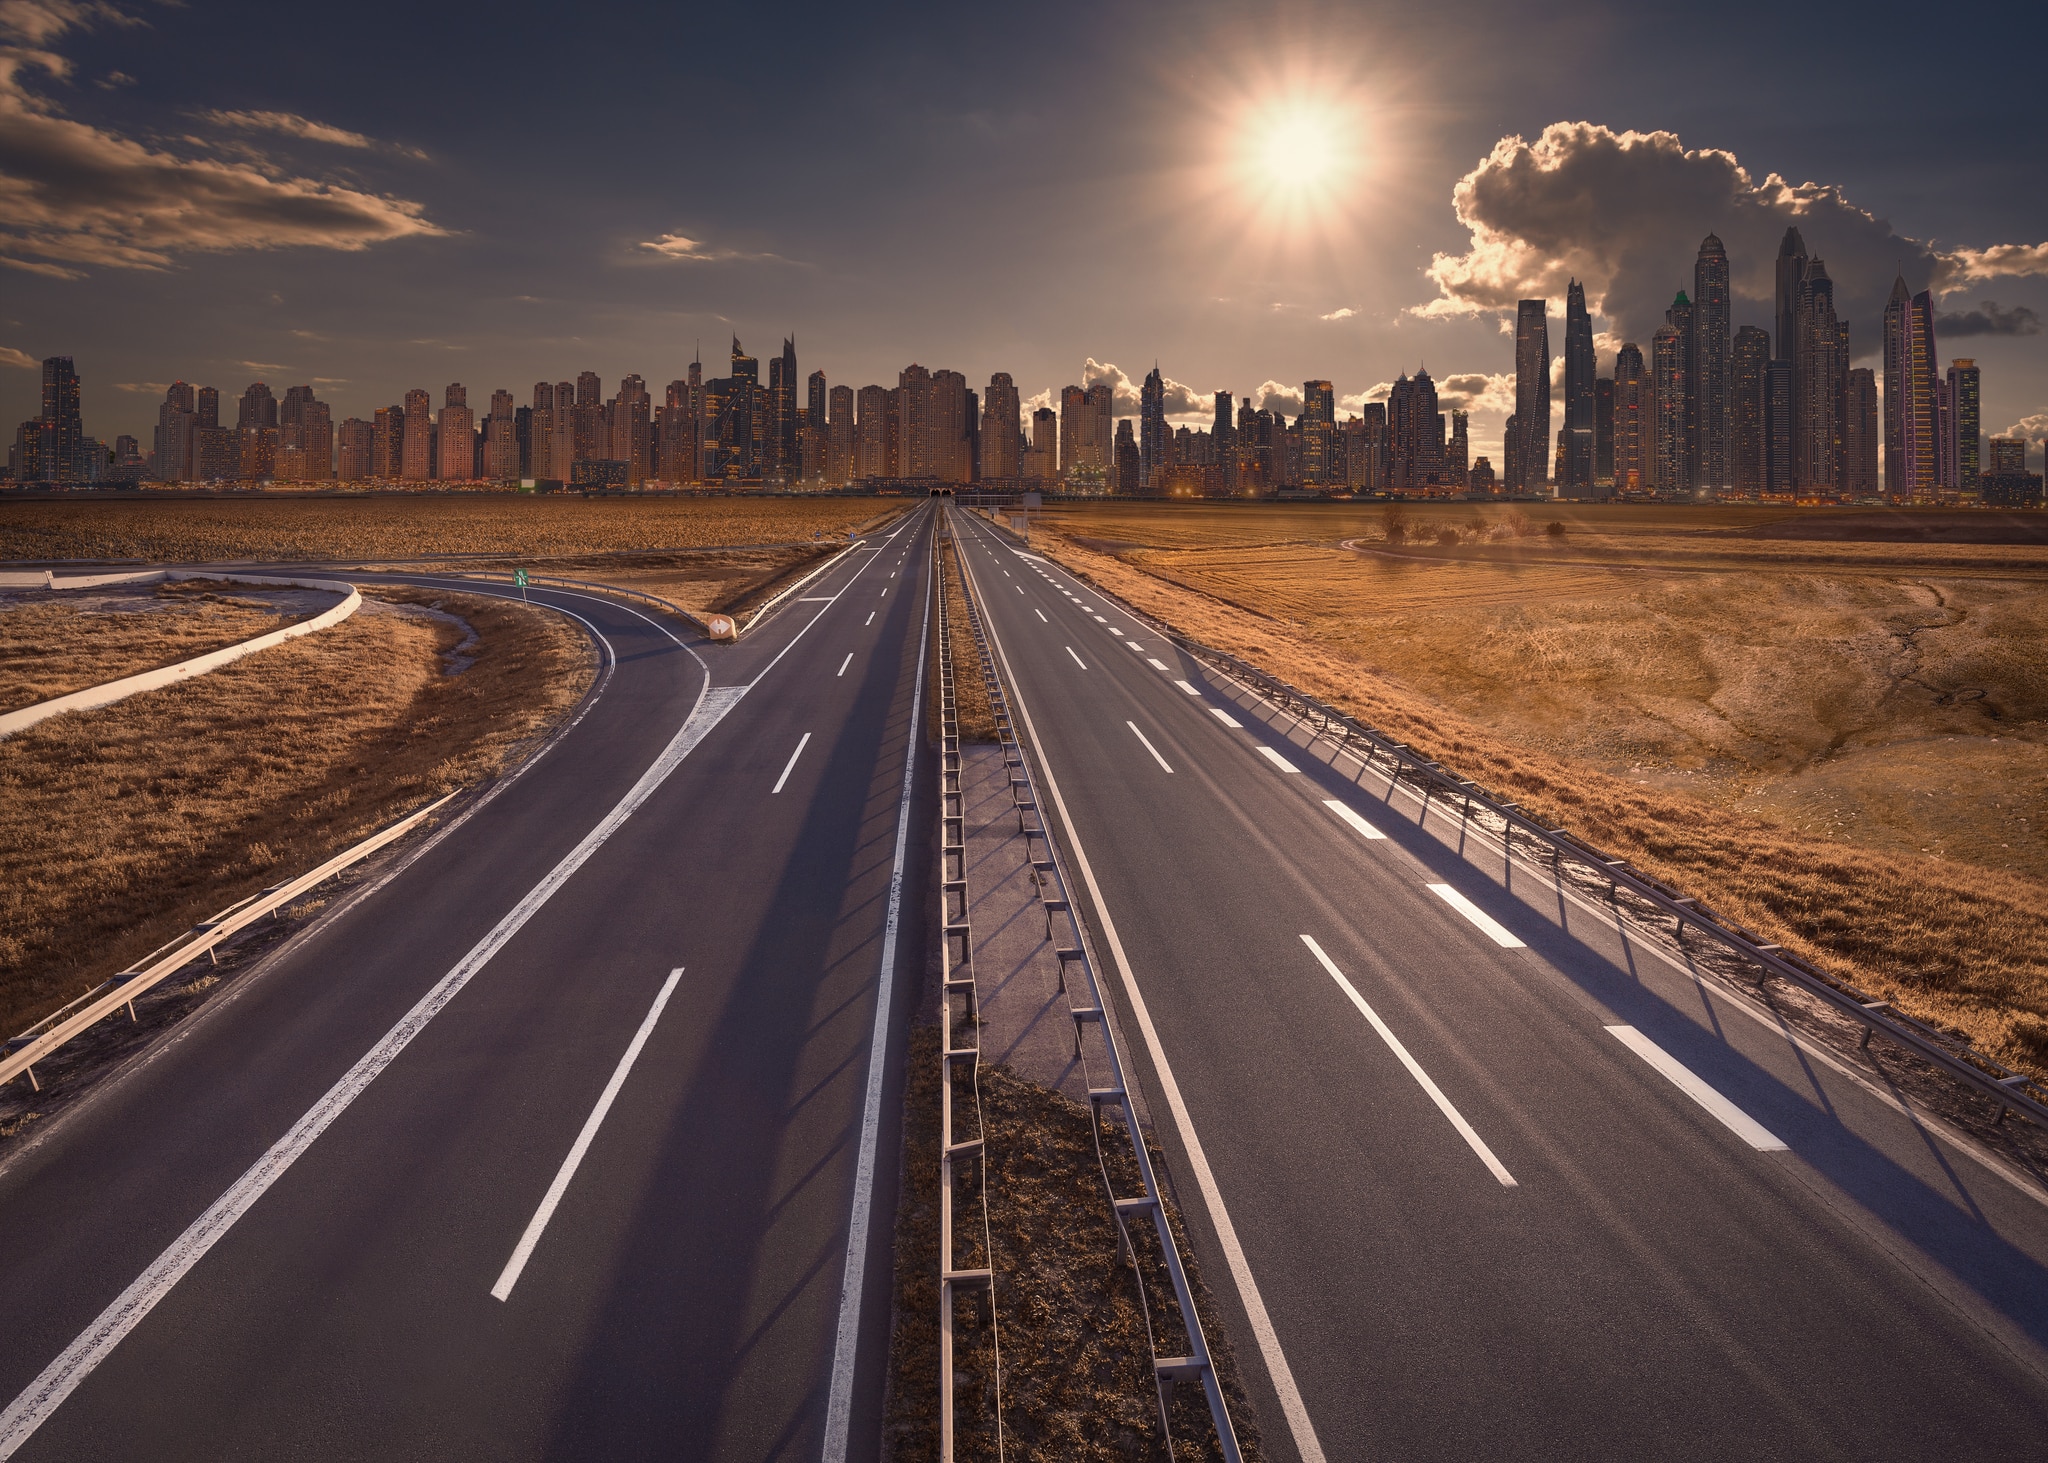 Notes from the road: Infrastructure investors are focused on three key themes